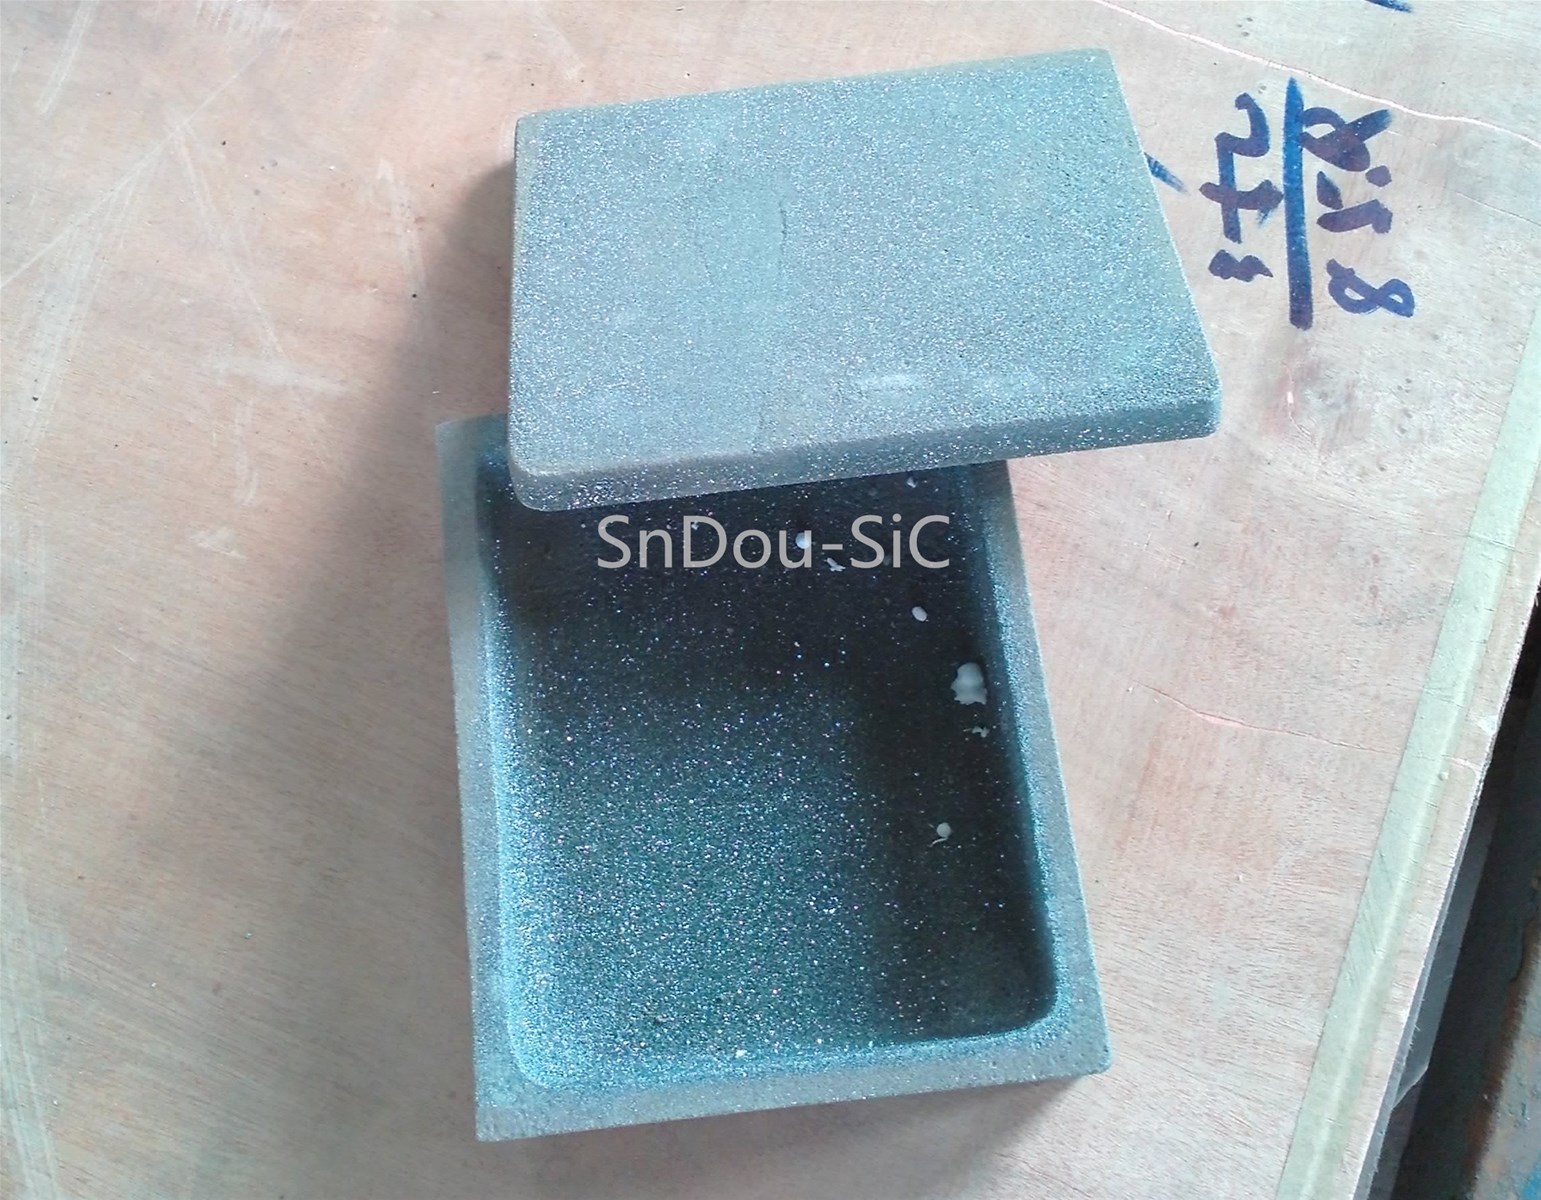 SiC Crucible sagger box for battery materials firing by RSIC recrystallized SiC ceramics from china tangshan sandou